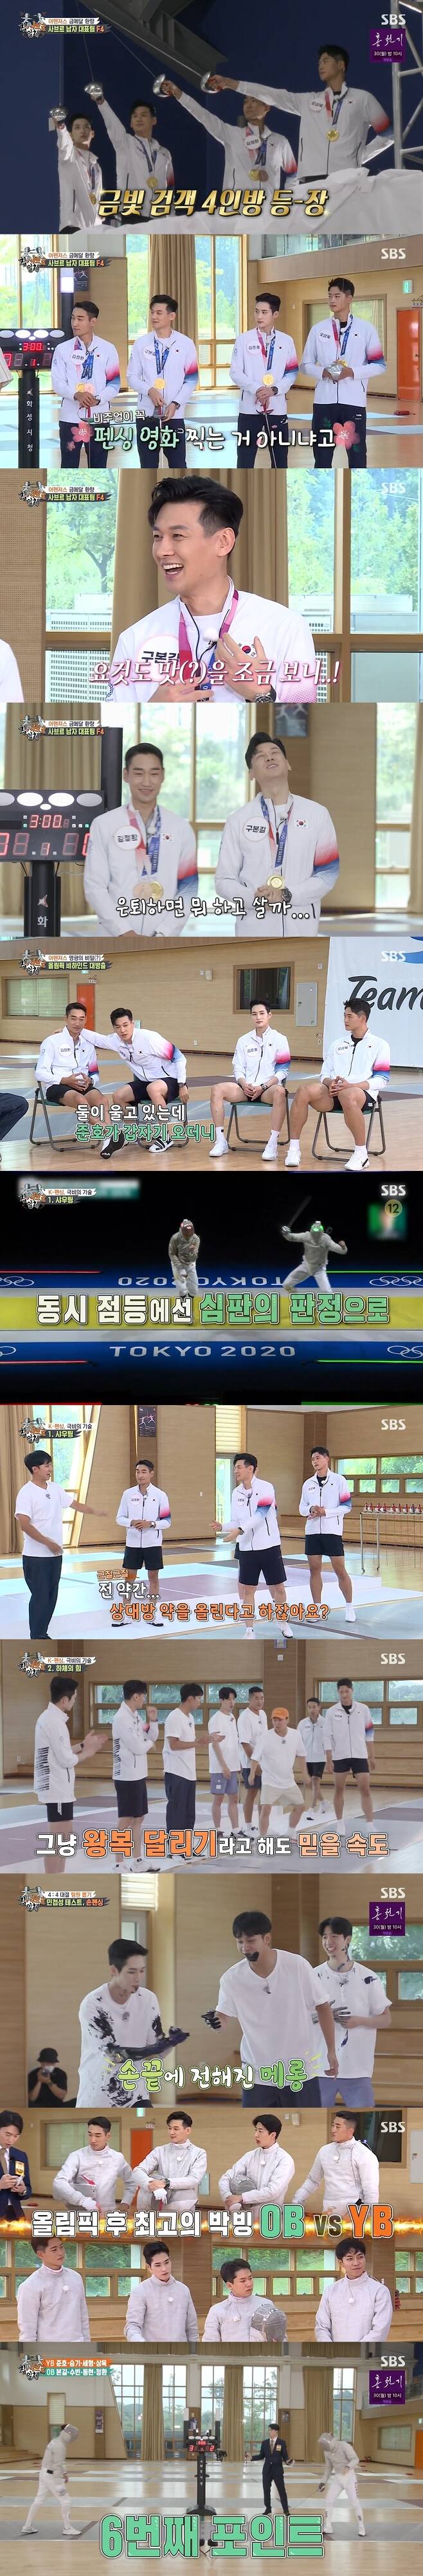 Seoul = = fencing sabre four-man introduced directly from the behind-the-scenes of the Olympic Games to the secret of K-fencing.On SBS All The Butlers broadcasted at 6:30 pm on the 15th, Olympia Games fencing Sabre mens four-man Kim Jung-hwan, Gu Bon-gil, Kim Jun-ho and Oh Sang-wook were dispatched as masters.On the day, fencing sabre four-man confided in the backdrop of the Olympic Games: Kim Jun-ho, a military base chief, said, Im also told by seniors to be in the spirit.Im a senior, but I see Junhos eye, Gu Bon-gil said.Kim Jung-hwan also said, I said I was asking for my teeth in the fourth round, he said. I did not say coach, but I said it.Asked if he felt popular, Gu Bon-gil recalled, I realized that I was popular, I seemed to be a Hollywood star.When asked if it was burdensome, he said, At first, it was a little burdensome, but when I taste it, I do not say that I row when I come in, but I am enjoying it nowadays.Kim Jung-hwan recalled that he felt wrist pain during the German game, After playing six games at the time, I was exhausted because I was a veteran, so I was able to rest for five minutes for a while.Fencing confirms Kyonggi final runGu Bon-gil said, We lived together at the time, but even if we met Kim Jung-hwan, we were tearful. I was passing by the trouble, but Junho came and said, Its not over yet.Kim Jun-ho said, The match is not over yet, but I still said it because it remains.Kim Jung-hwan said, I saw that scene about 100 times, but it is a tear button. I have been tearful because I am indiscreet next year.The full-scale class on fencing has begun.First, Kim Jung-hwan said, When a fire comes in, there is no need to shout, and I scream to appeal that I blocked and hit the simultaneous lighting.Gu Bon-gil said, Im going to raise my opponents medicine. If the referee admits, he now makes a sound, Oh! Aah! Instead, I do not do it because I do not do it.Kim Jun-ho said, I do not do well. I do it when the fire comes in at the same time, but I usually turn on one.Hatje Cantz Verlags power is the key to fencing, it also said.Kim Jung-hwan said, It is called fencing footwork, but Hatje Cantz Verlag must be strong so that he can dig into the other person momentarily.Hatje Cantz Verlag has been a big winner since the London Olympic Games, he said. Korea has been fencing since middle school and has a weak hand technology, so we raise Hatje Cantz Verlag.After showing him training Hatje Cantz Verlag, sitting up without touching his hands on the ground, balancing with only one leg, Gu Bon-gil boasted that he dos 30 to 50.He also impressed with the Hatje Cantz Verlag power by moving his steps at a tremendous pace.Finally, he showed agility: We did hand fencing for the test, and fencing four-man said, Im confident even if its 4-1.However, at first, Yoo-bin was buried once in Kim Jun-hos face, but eventually Kim Jun-ho won two consecutive wins, following Yoo-bin to Yang Se-hyeong.He also attacked Lee Seung-gis mouth and Kim Jun-ho laughed, I felt the sea in my hand.OB team Kim Jung-hwan and Gu Bon-gil cited Yoo Soo-bin and Kim Dong-Hyun as the primary candidates.I thought that Yoo Soo-bin would never be buried in your face, but your arms were long, so Rich was good and the distance was unique.YB team Kim Jun-ho, Oh Sang-wook chose Yang Se-hyeong and Lee Seung-gi.The OB team and the YB team divided the fencing Kyonggi, and the former fencing player Won Woo-young commentator appeared in surprise.Won Woo-young said, I went to Olympic Games with OB, and I worked with YB for the national team. Kim Jun-ho said, It was a roommate.First, Gu Bon-gil and Kim Jun-ho faced each other, keeping the tie and playing a fierce Kyonggi to expect the results next week.